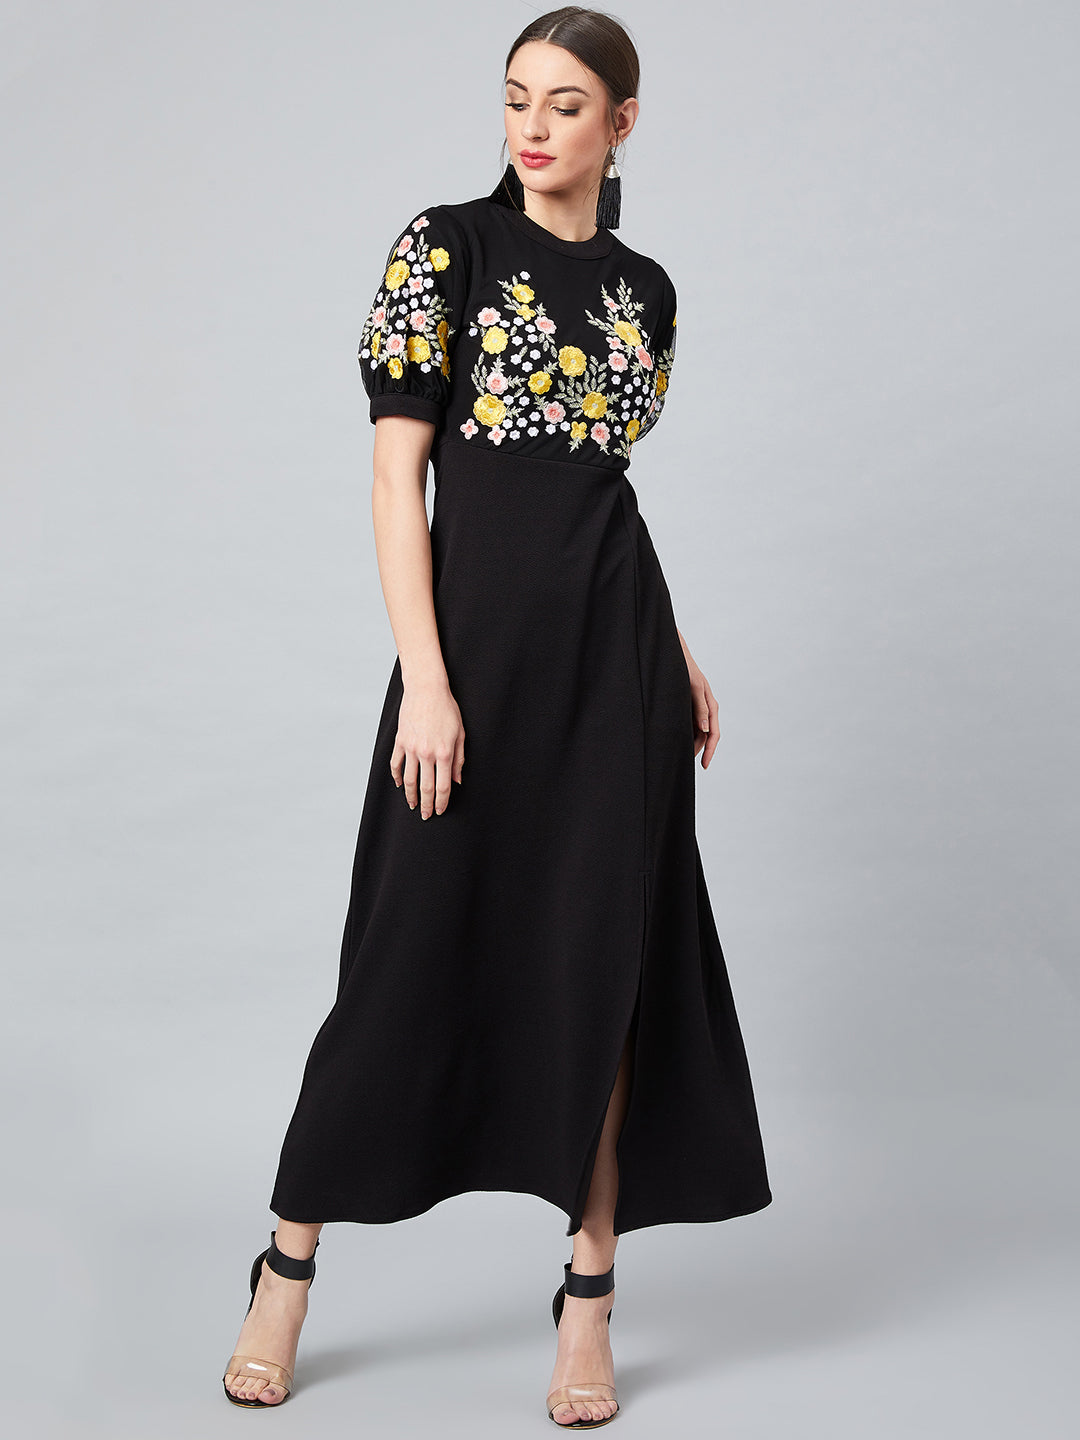 Athena Black 100% Polyester Embroidered Fit and Flare Dress - Athena Lifestyle